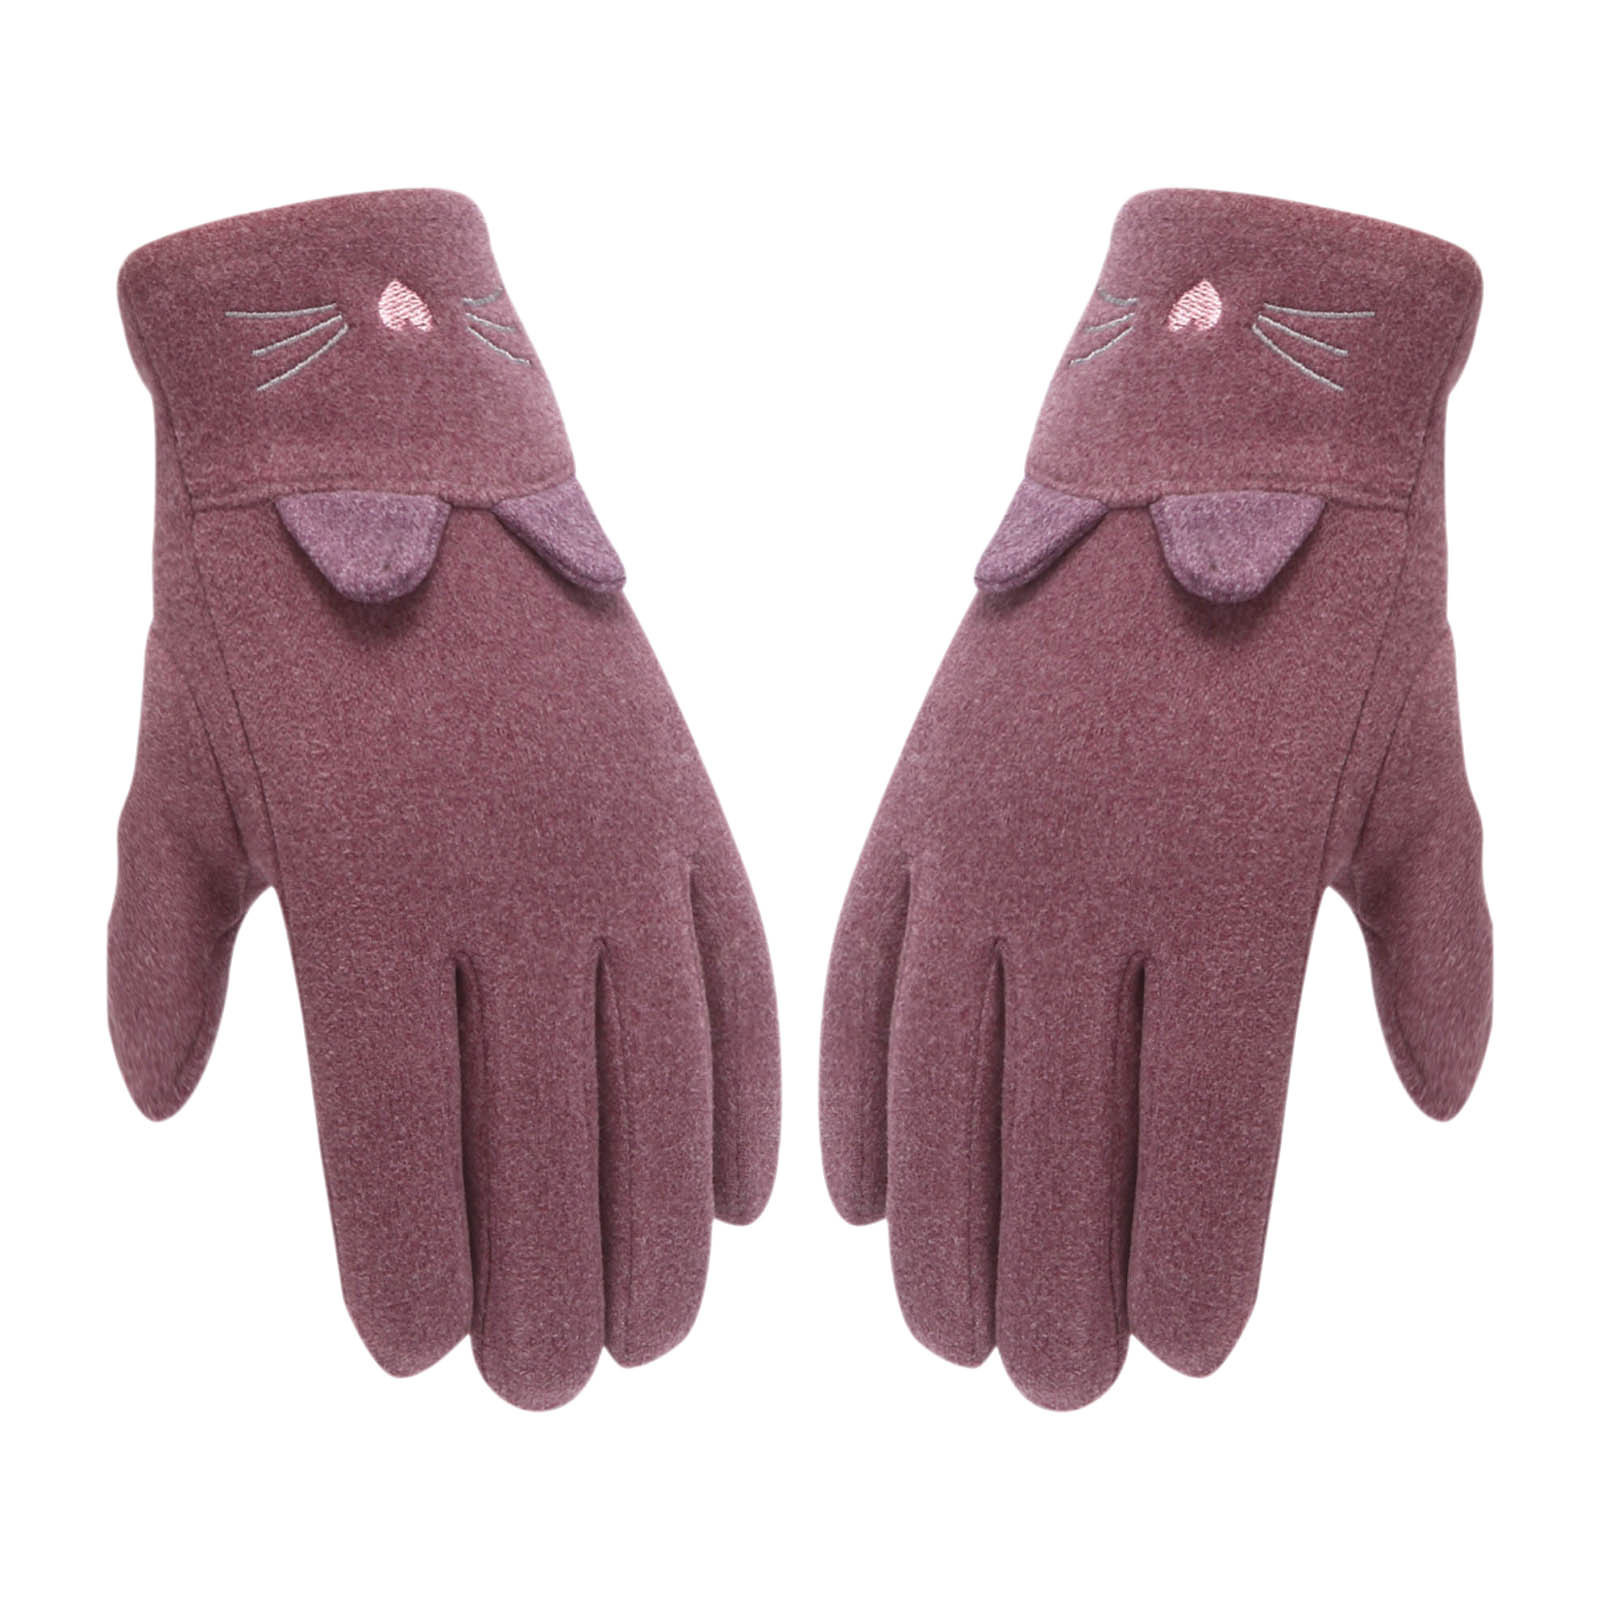 Uheoun Bulk Yarn Clearance Sale for Crocheting, Winter Warm Gloves Diving  Cloth Plus Velvet Thickened Outdoor Ladies Gloves Windproof Gloves For  Women